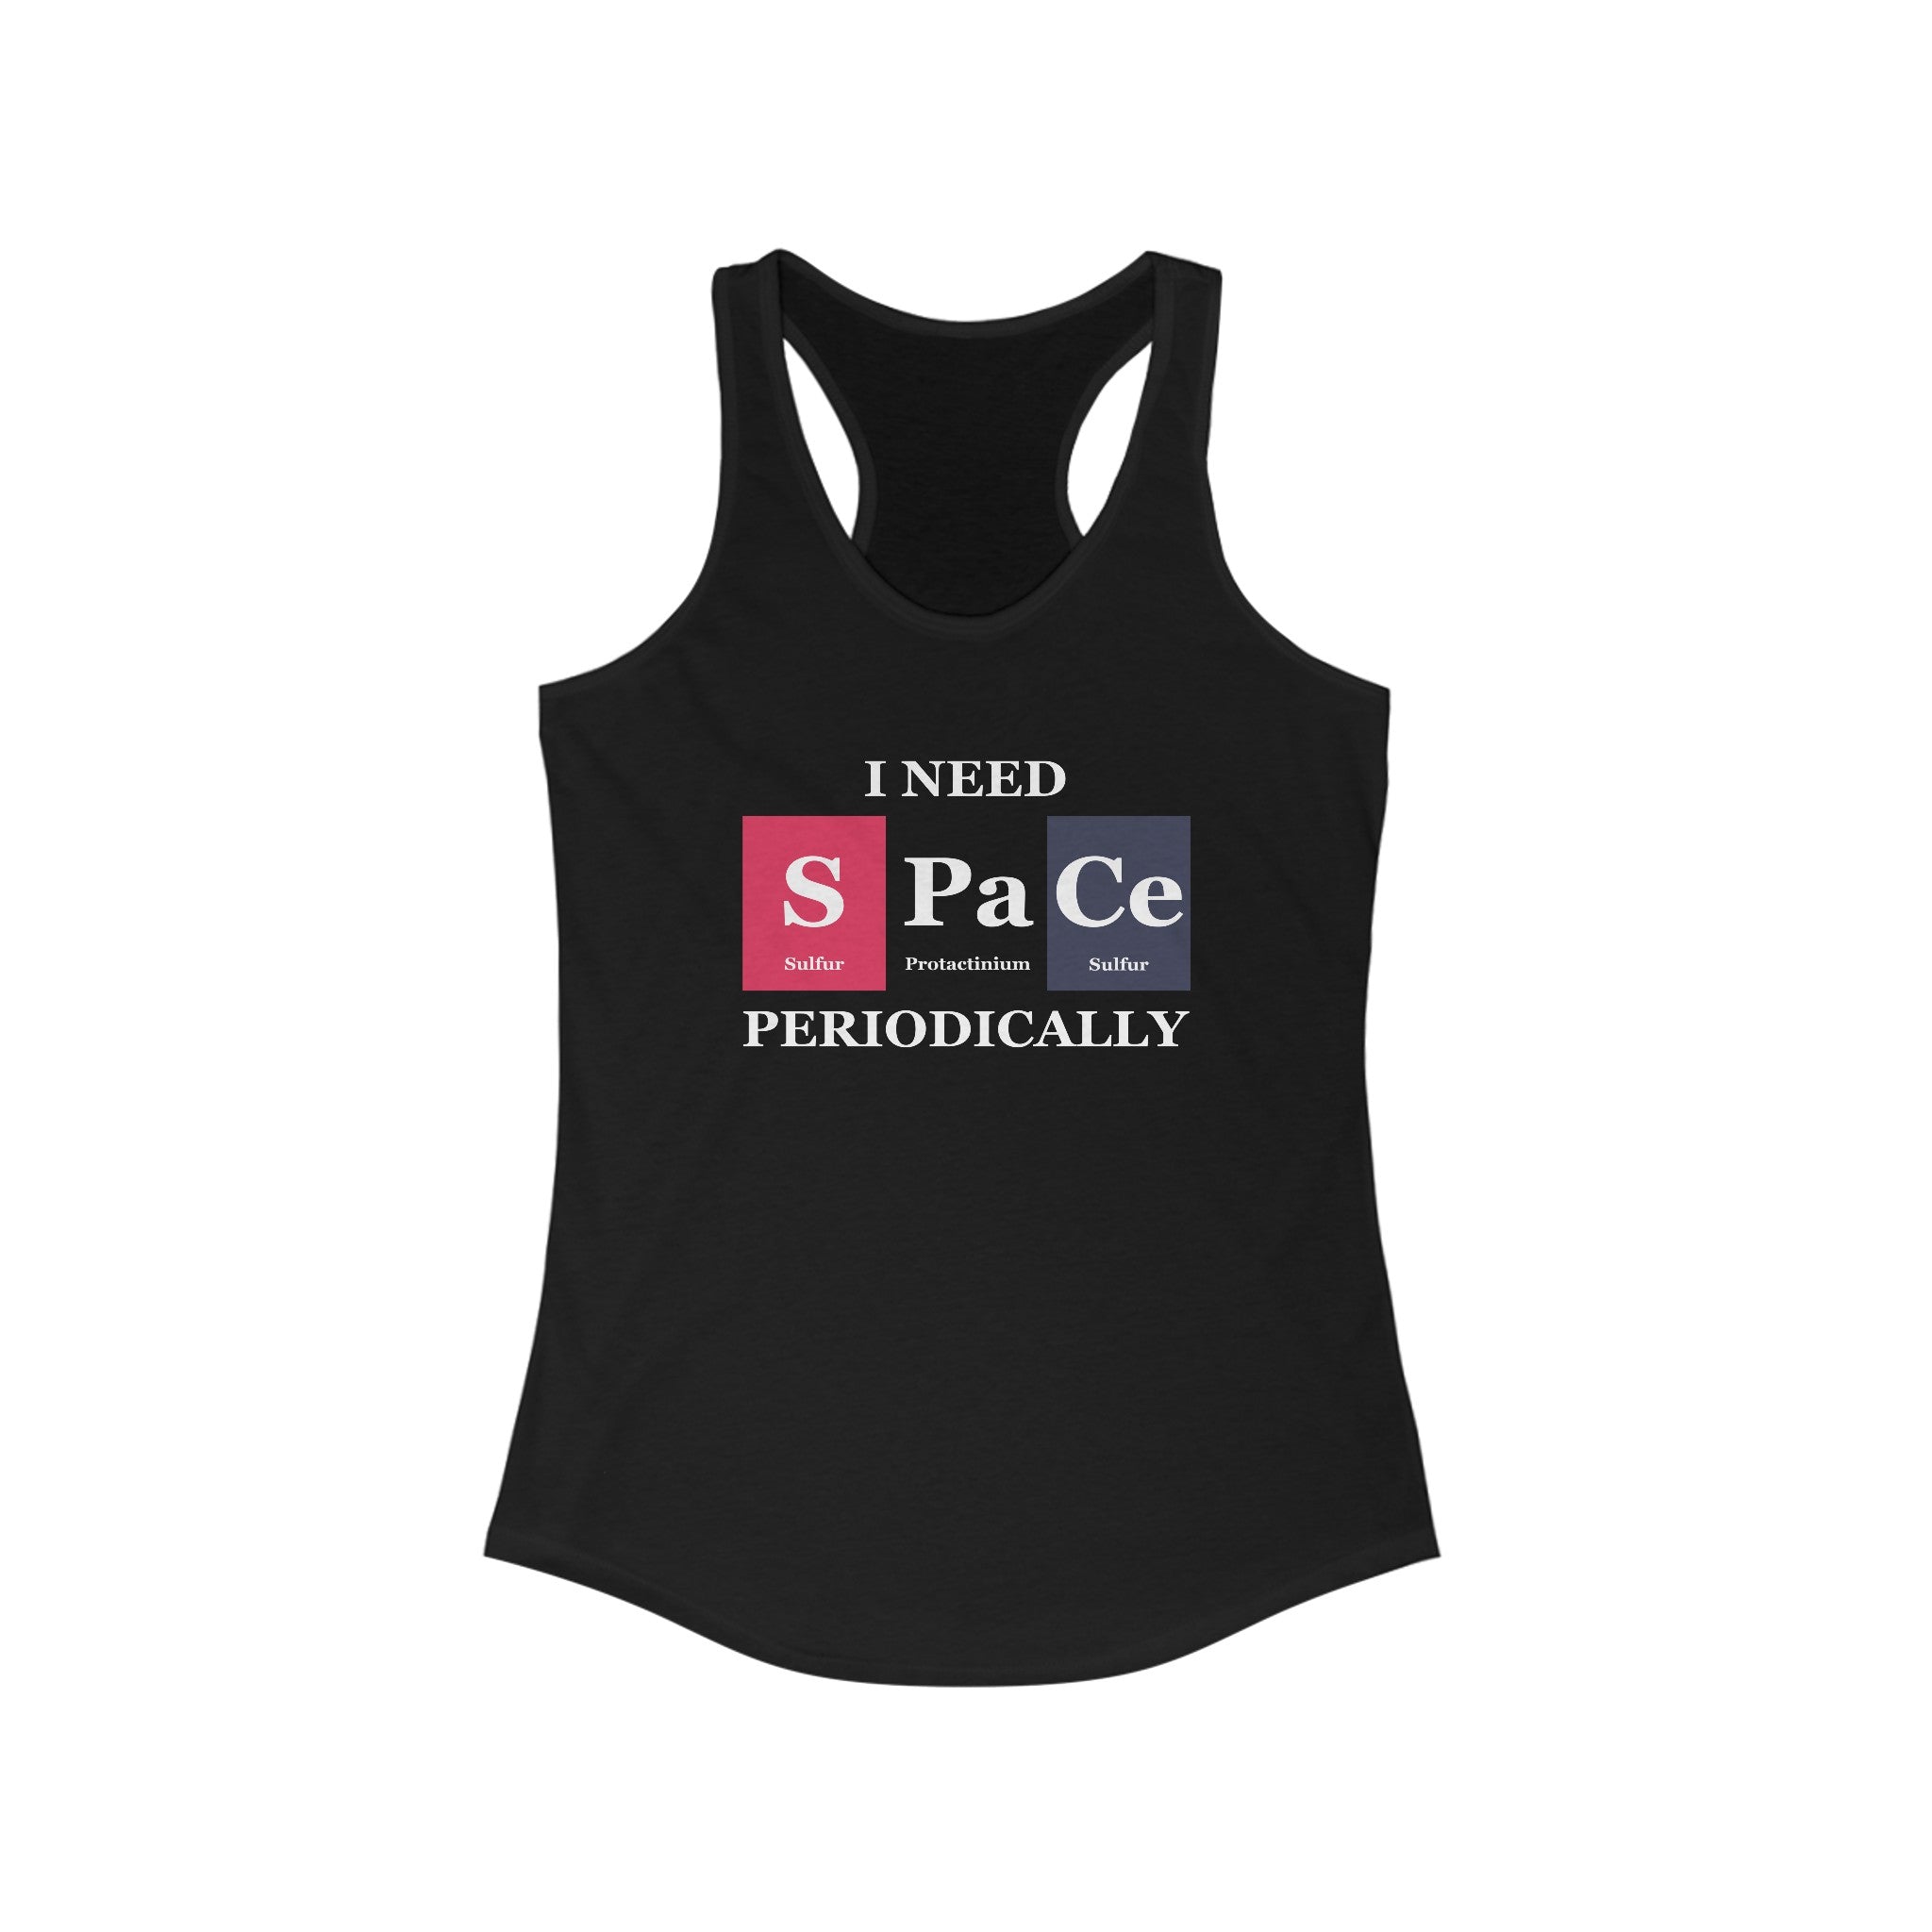 S-Pa-Ce - Women's Racerback Tank: Black ultra-lightweight tank top with white text that reads "I NEED SPACE PERIODICALLY," creatively using S-Pa-Ce designs with element symbols for sulfur (S), protactinium (Pa), cerium (Ce) and indium (In).